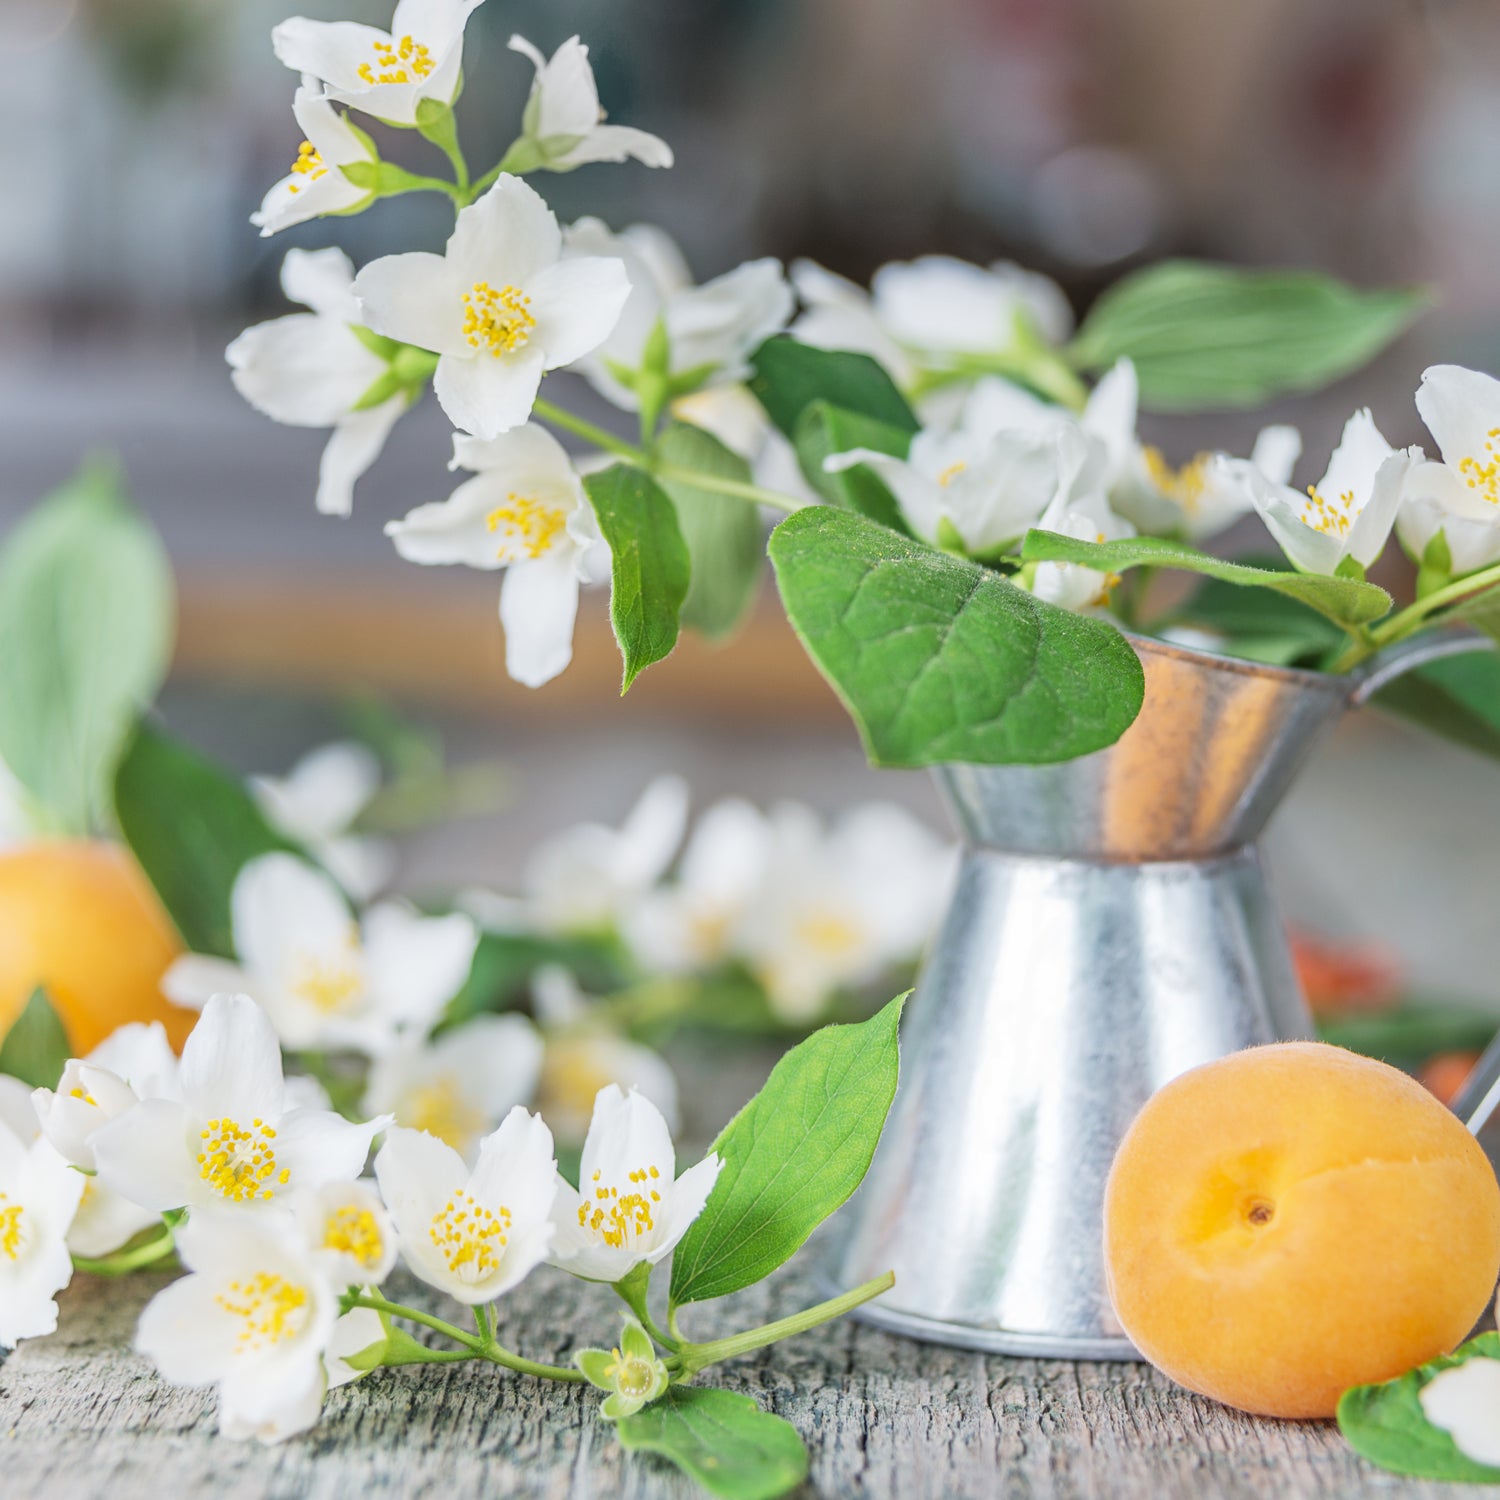 A still life photo of  jasmine blossoms and stone fruit - two of the fragrance notes found in the "Citrus Sunrise" scented candle from Tuscany Candle